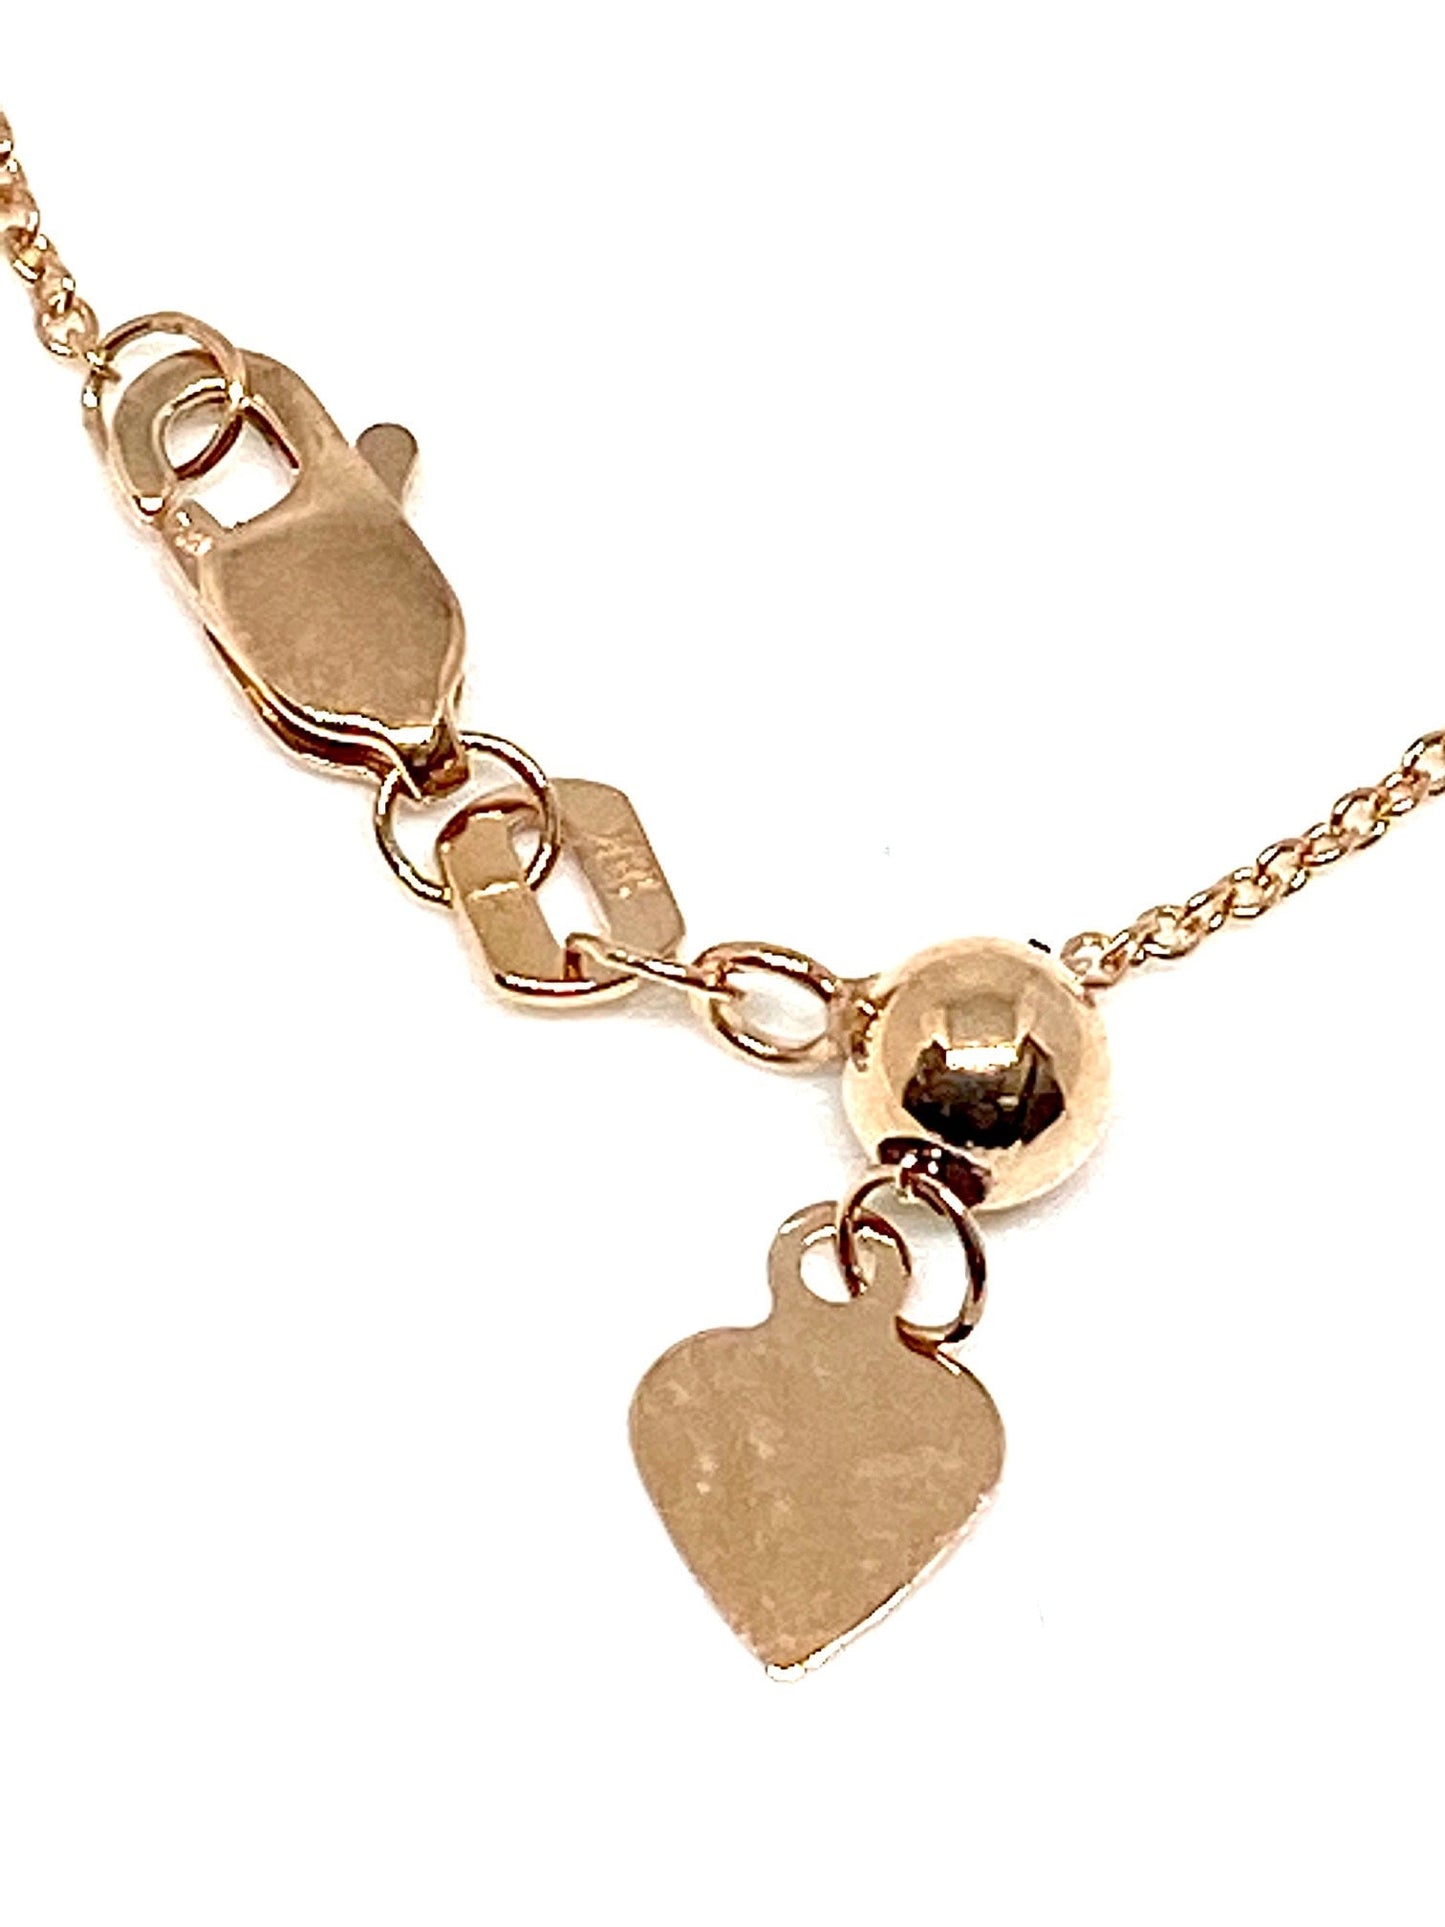 Rose Gold Rolo Cable Link Chain Heart Tag Adjustable Necklace